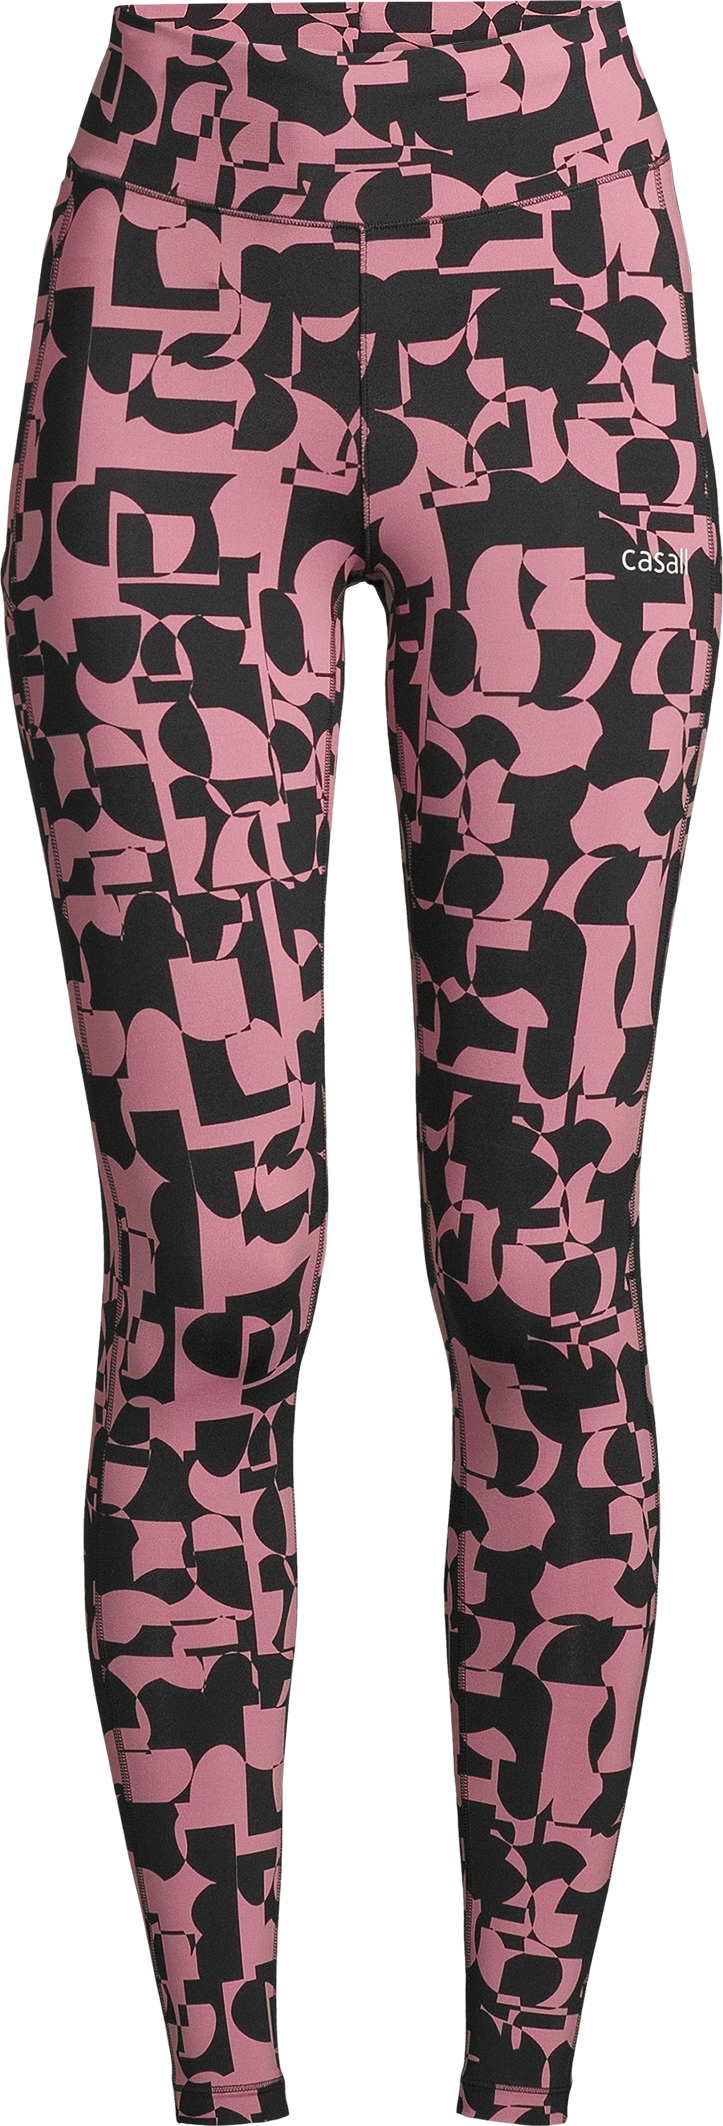 Casall Women’s Iconic Printed 7/8 Tights Echo Pink